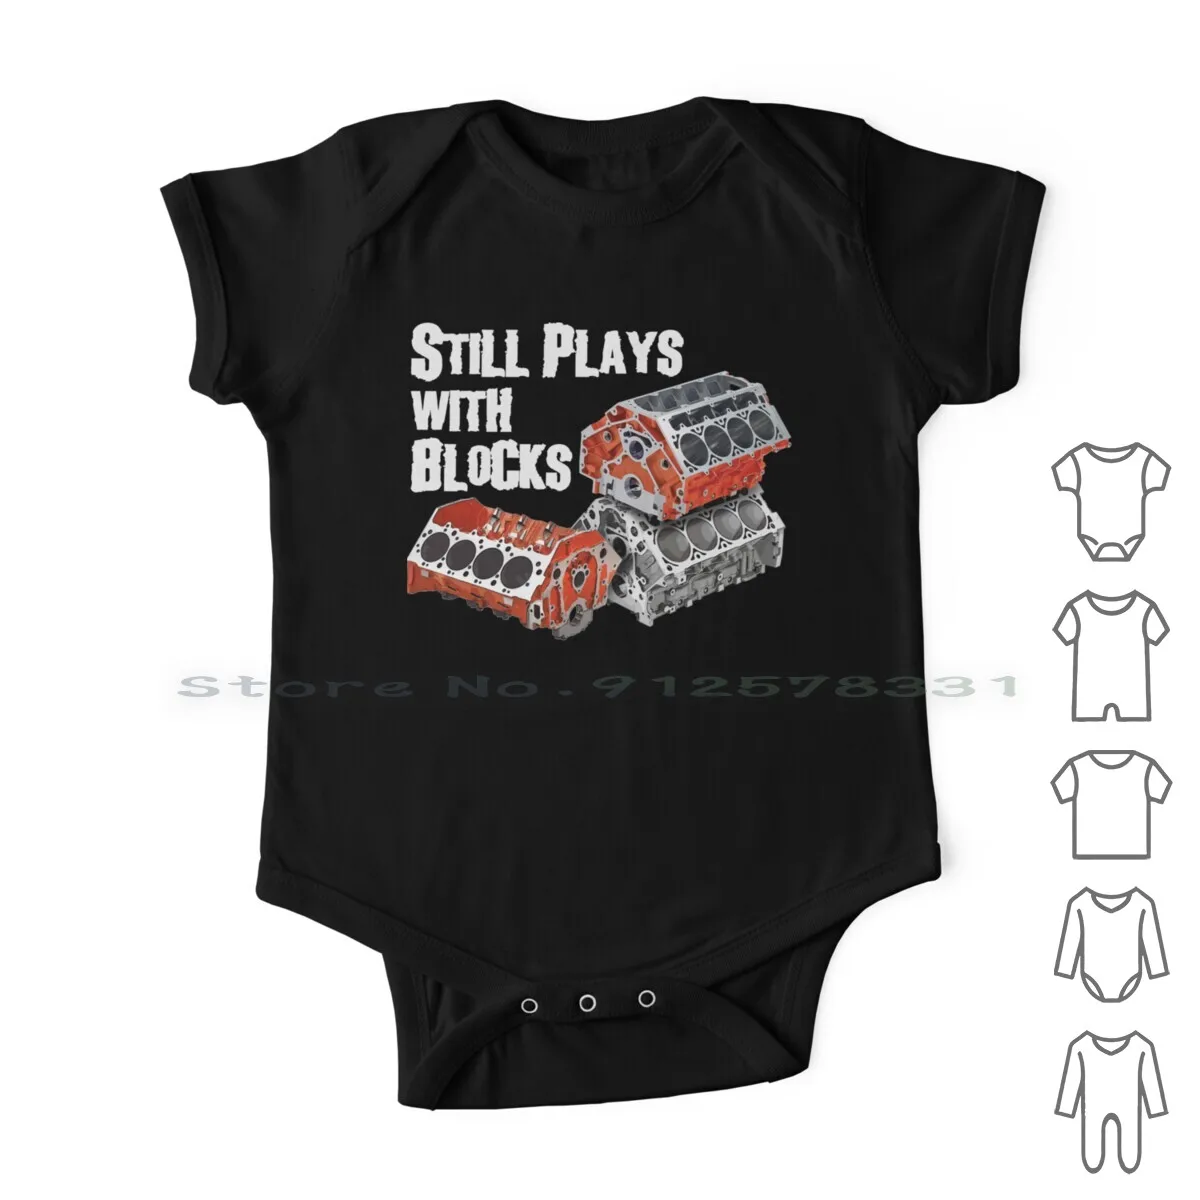 

Still Plays With Blocks Newborn Baby Clothes Rompers Cotton Jumpsuits Mopar Or No Car Plymouth Chrysler Desoto Hemi Muscle Car